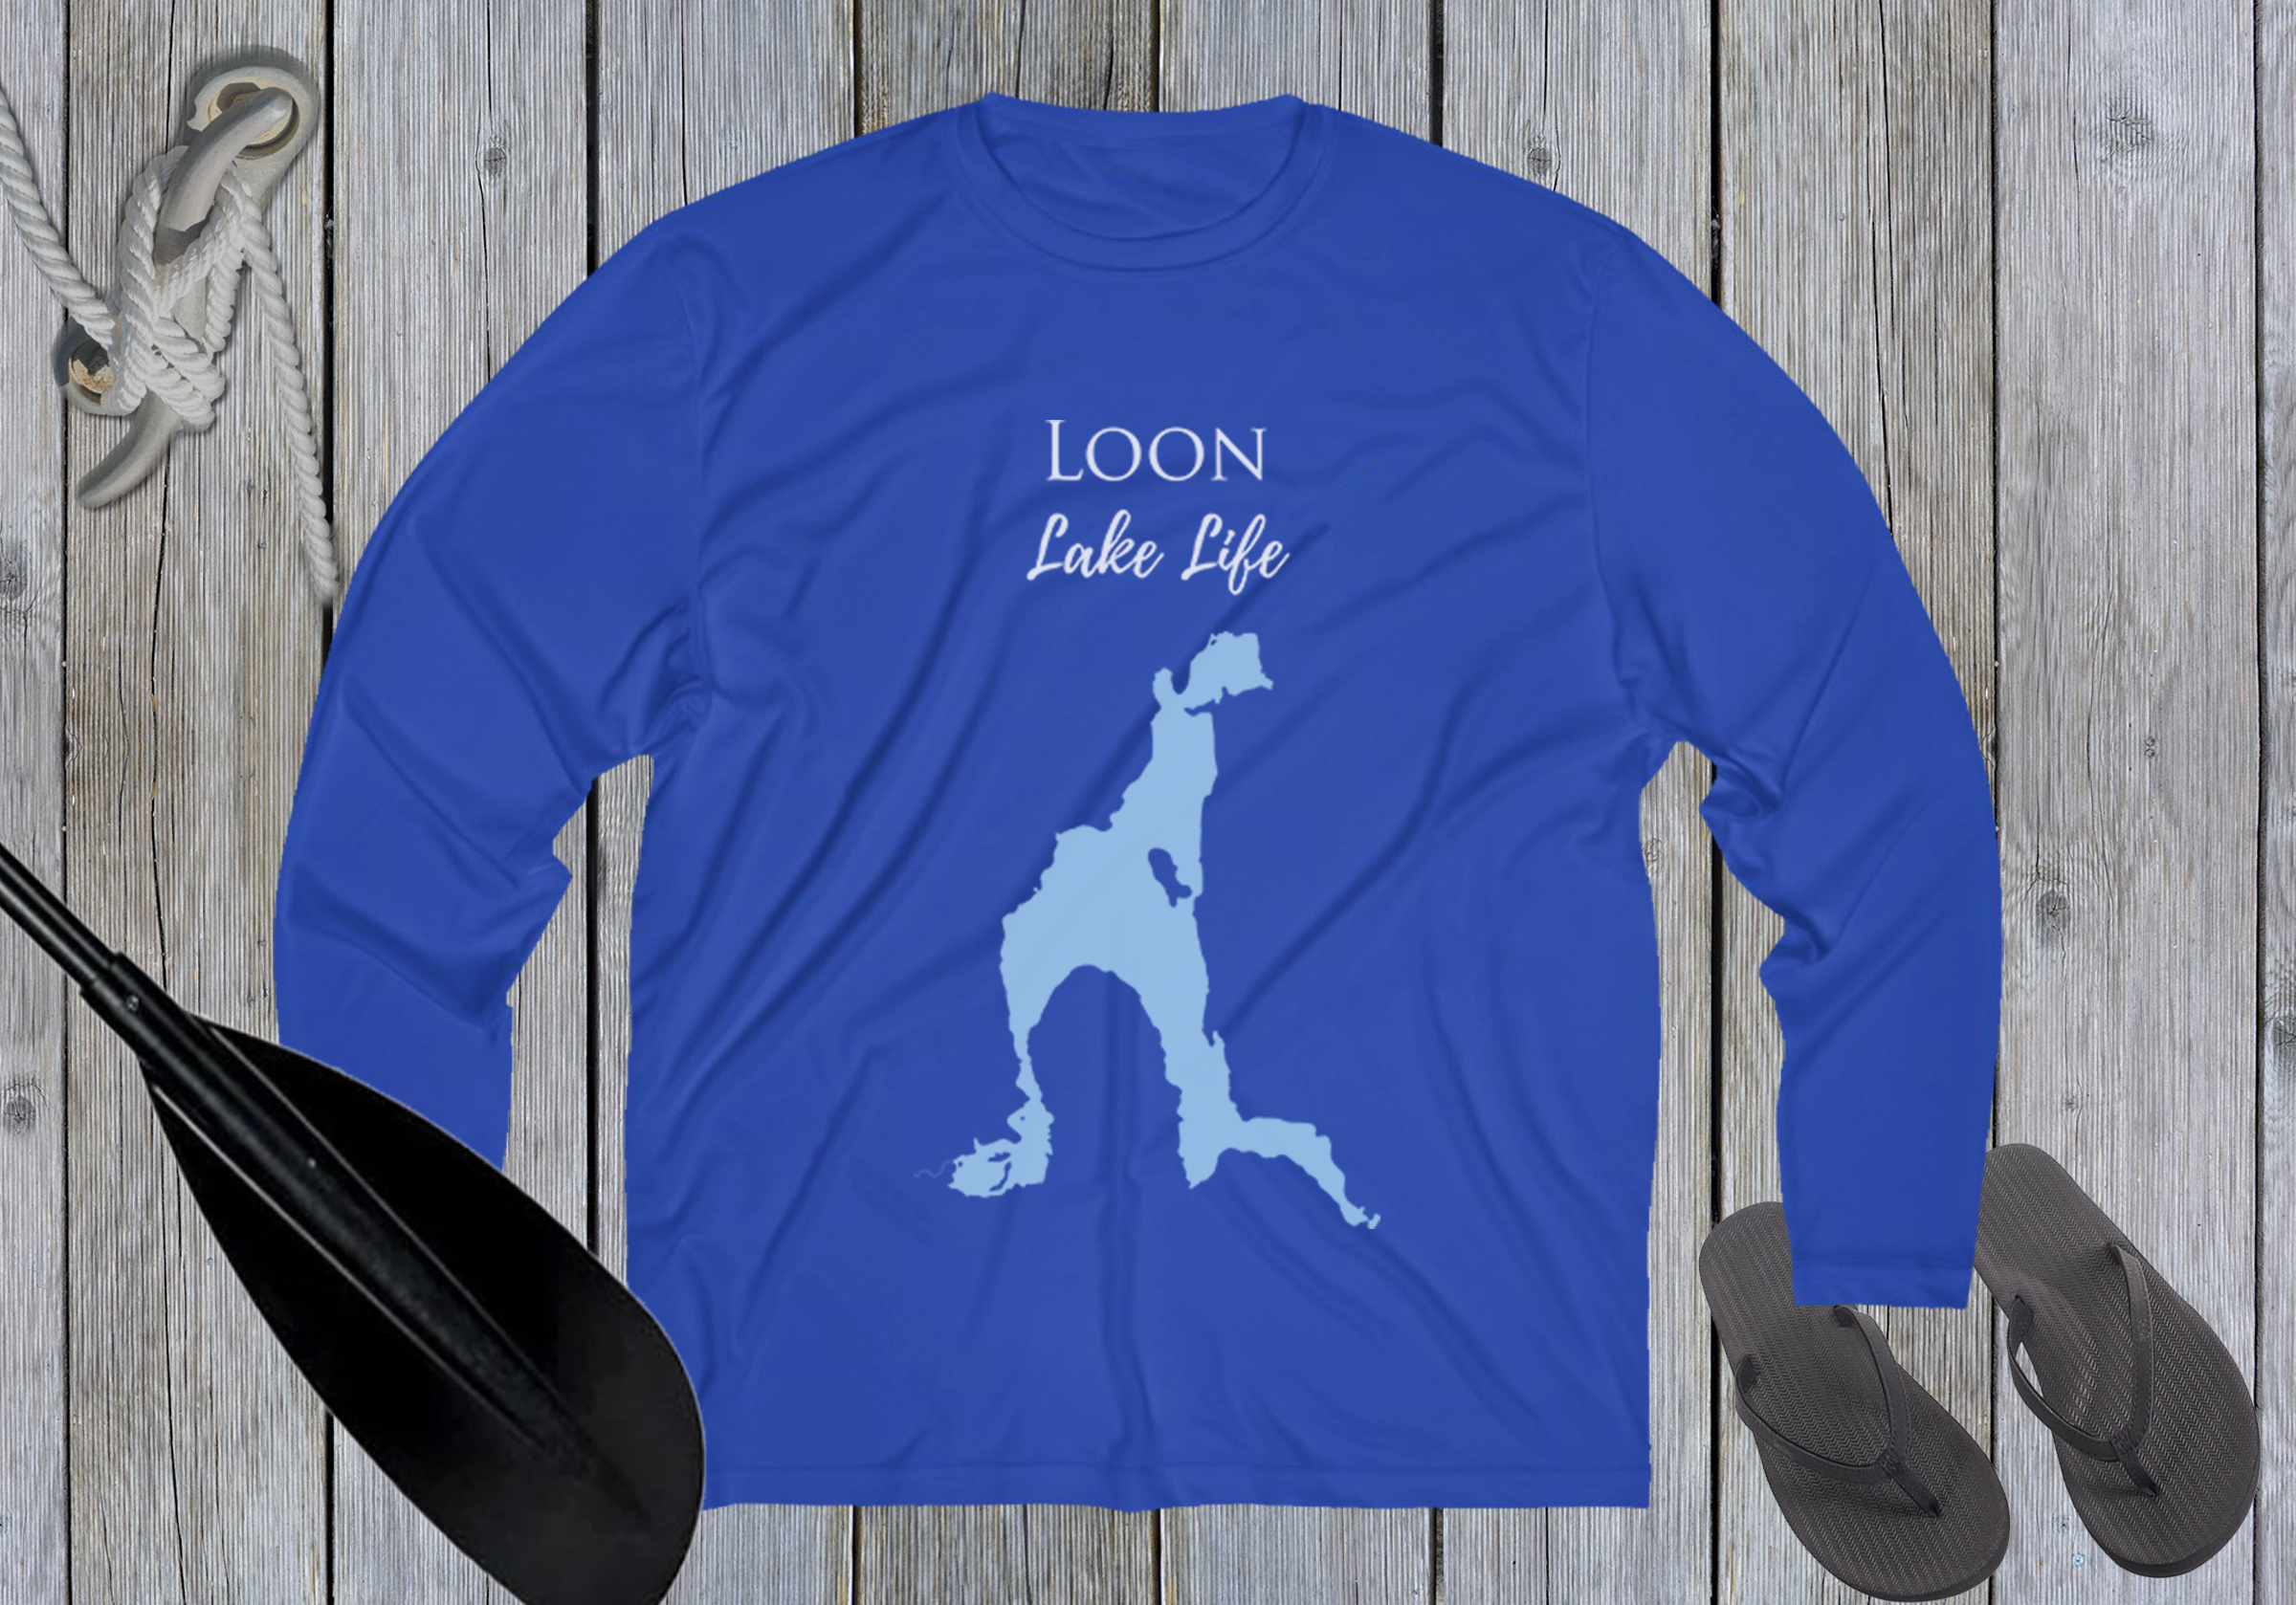 Loon Lake Life Dri-fit Boating Shirt - Breathable Material- Men's Long Sleeve Moisture Wicking Tee - New York Lake